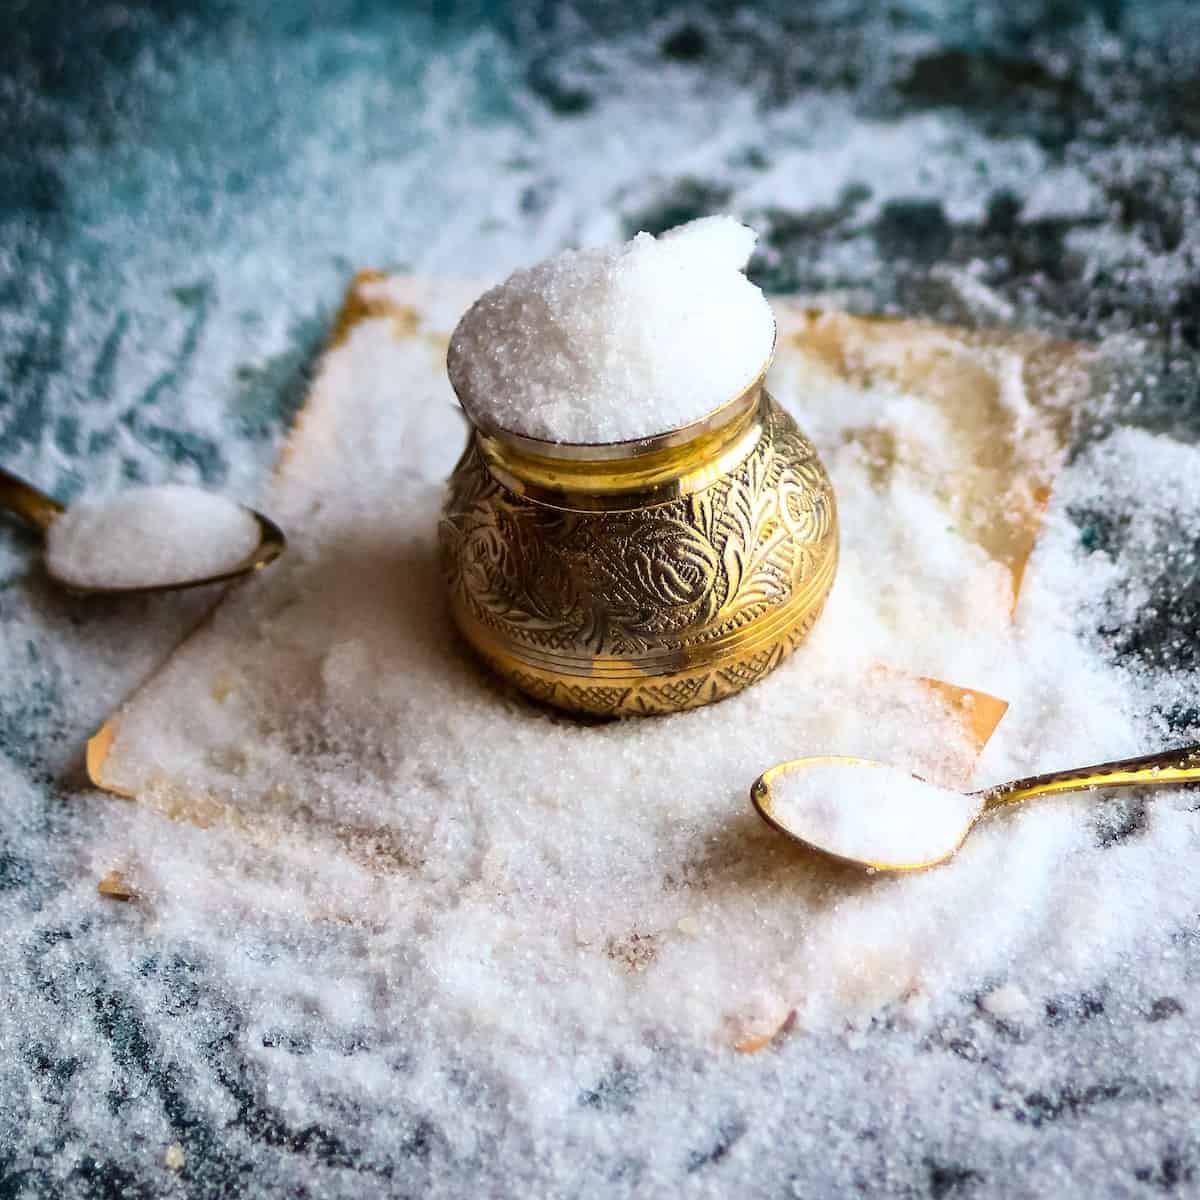 White sugar in a golden container to be used for a passion fruit recipe with two golden spoons on each side